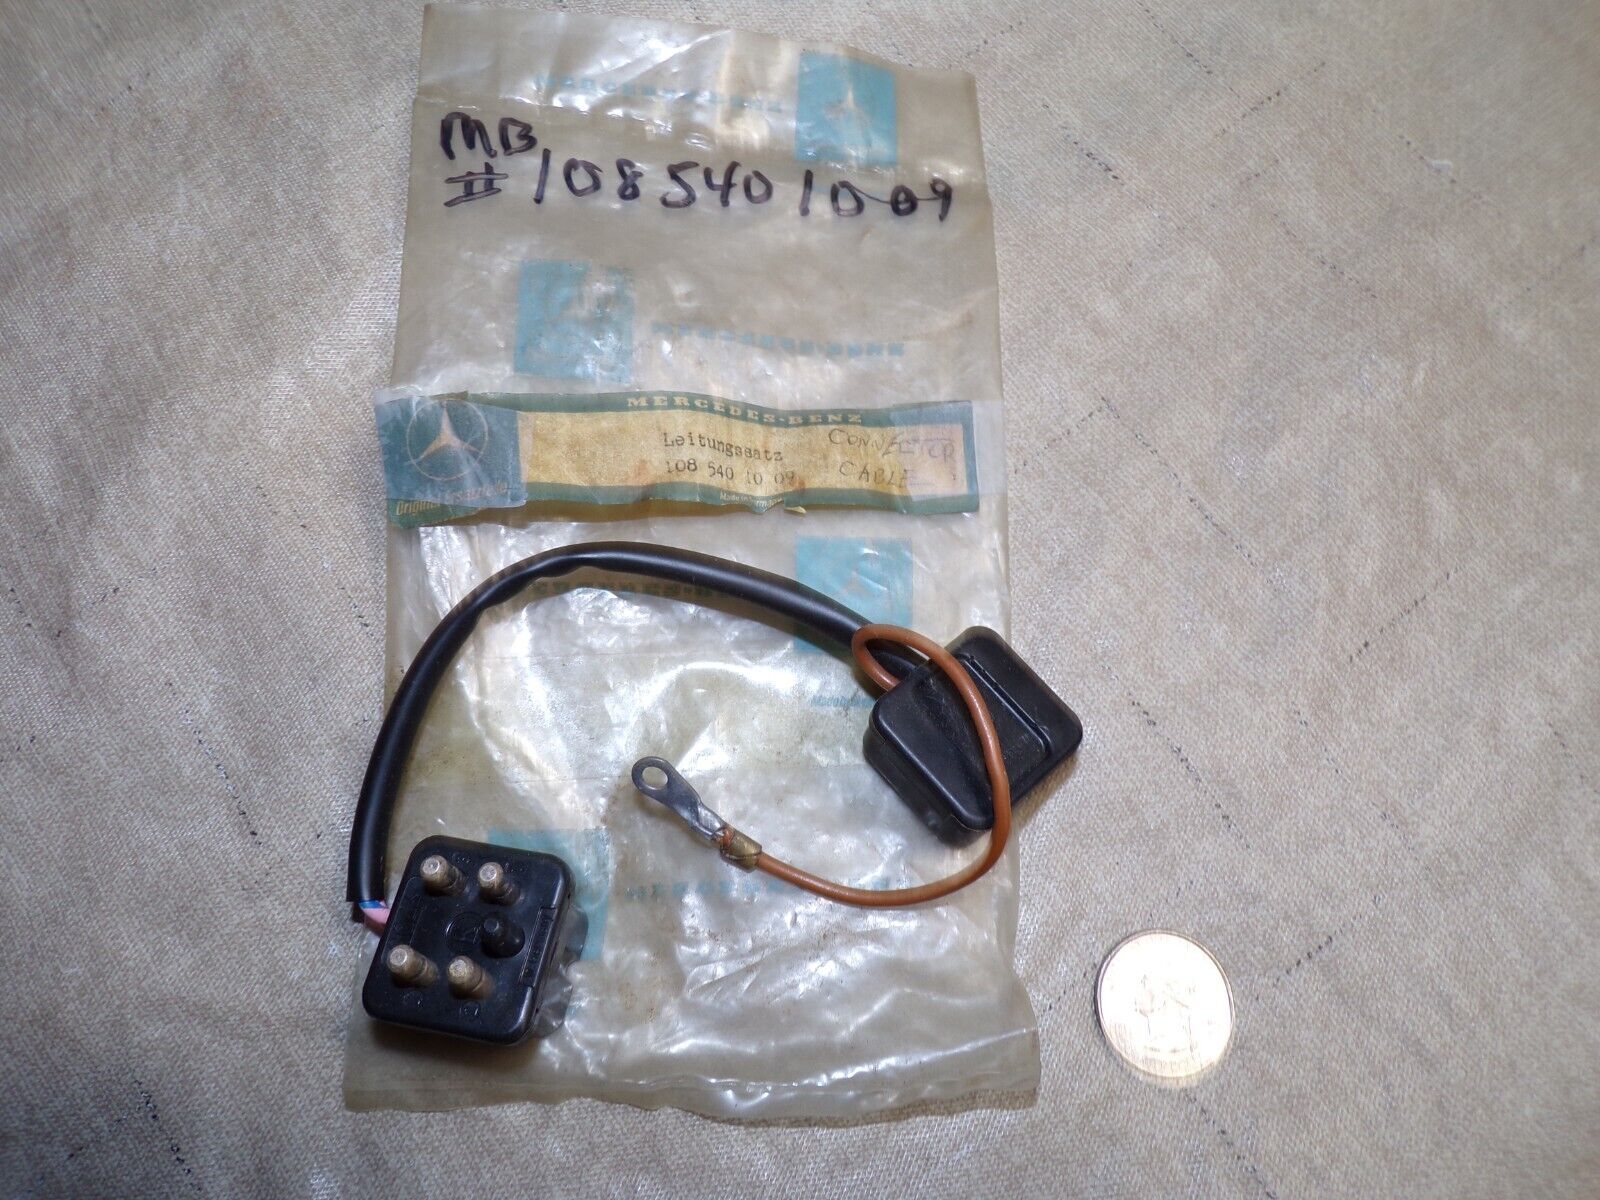 NOS Genuine OEM Mercedes#1085401009 Cold Start Elect Connect Harness  W108,W113